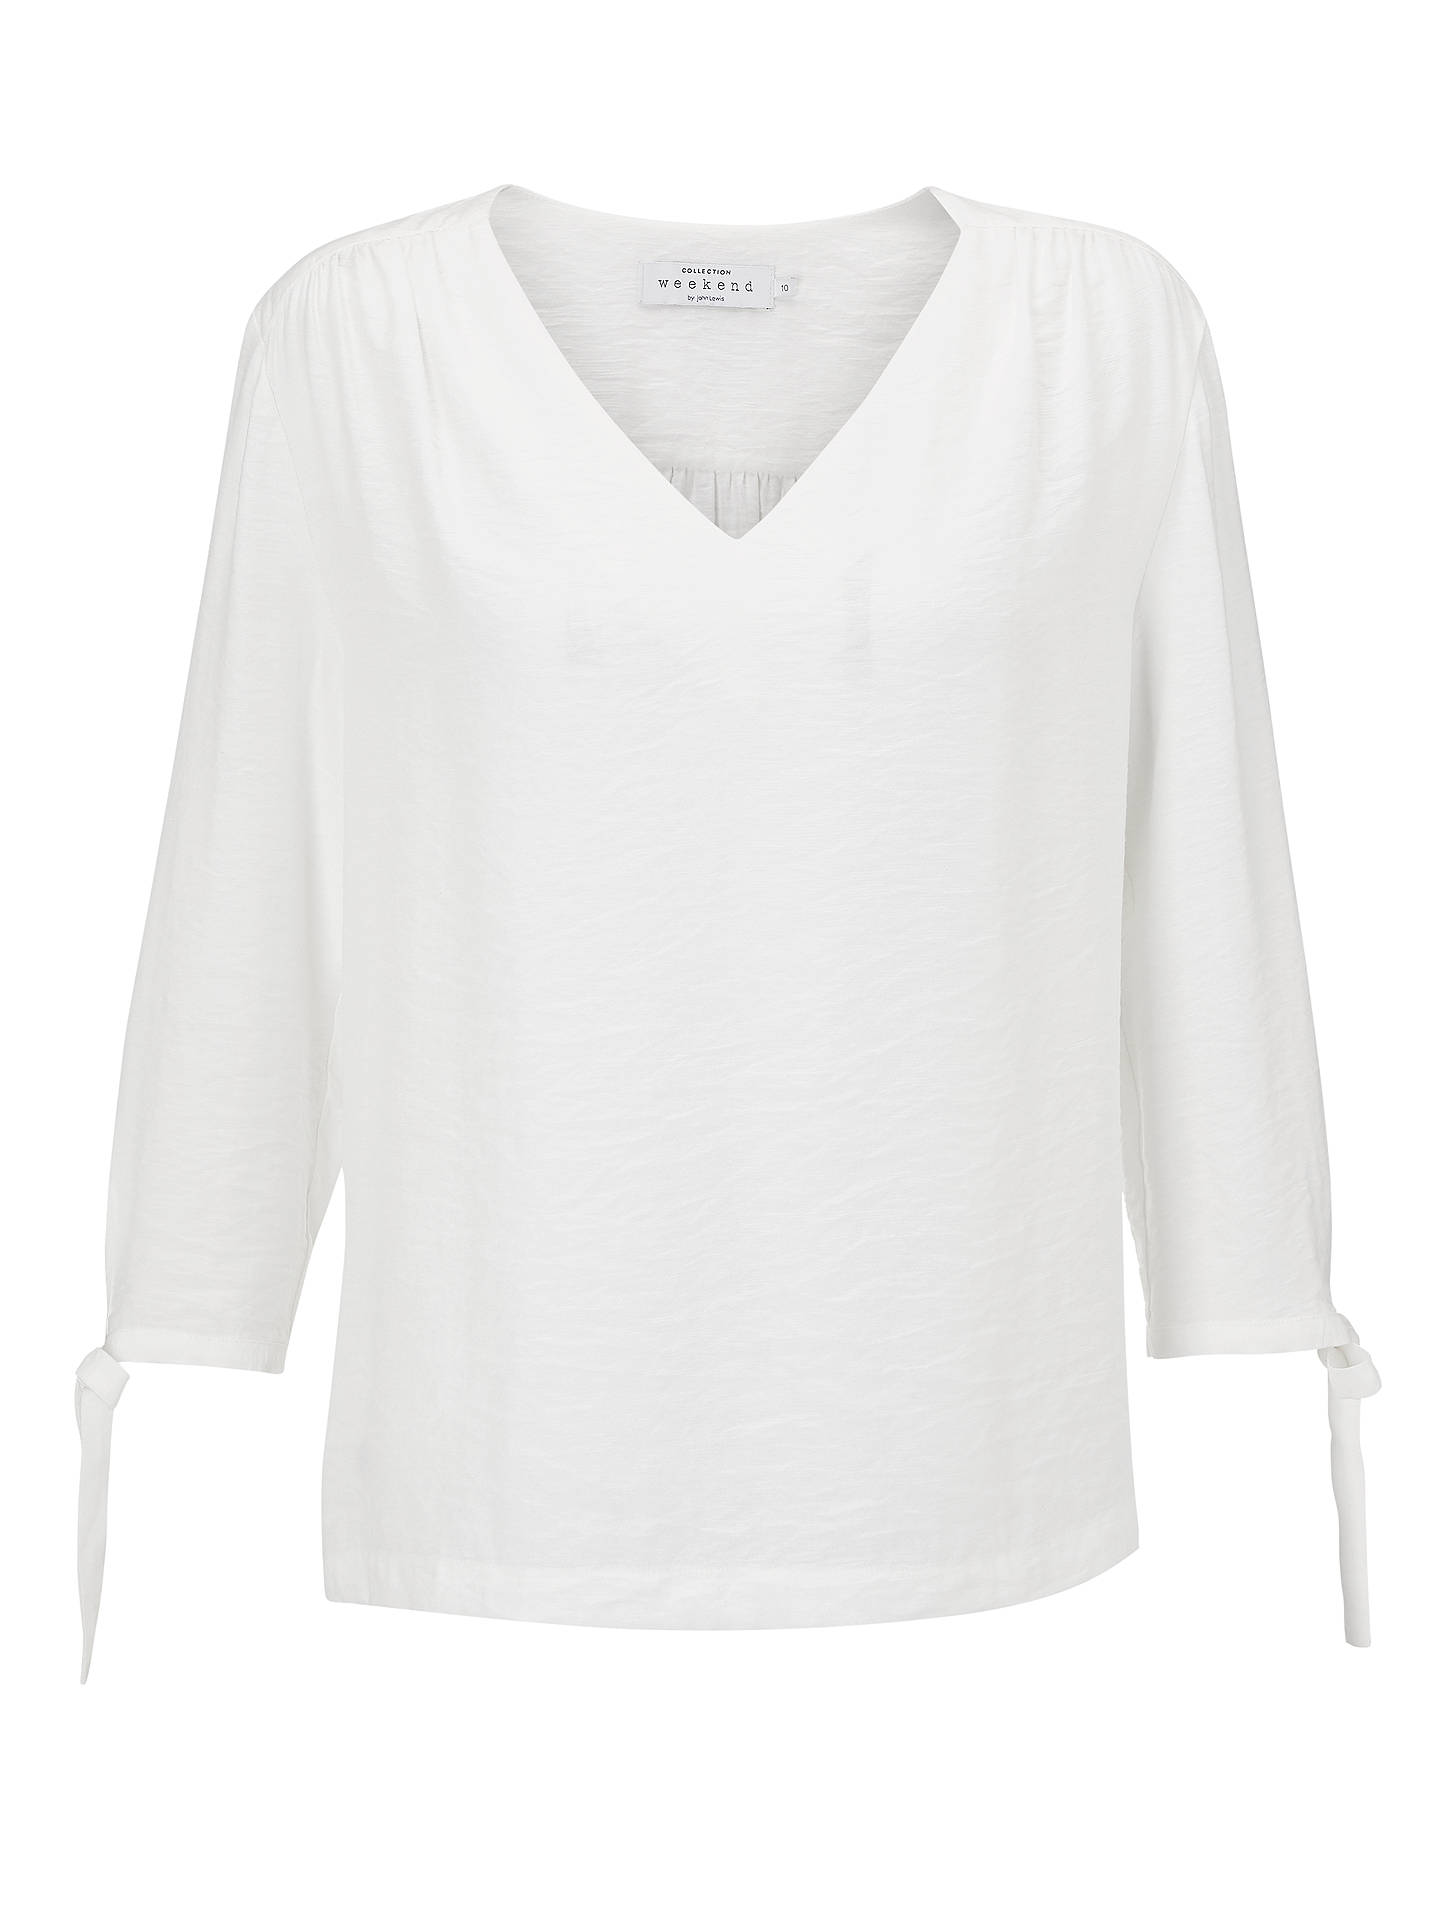 Collection WEEKEND by John Lewis V-Neck Cuff Top, Ivory at John Lewis ...